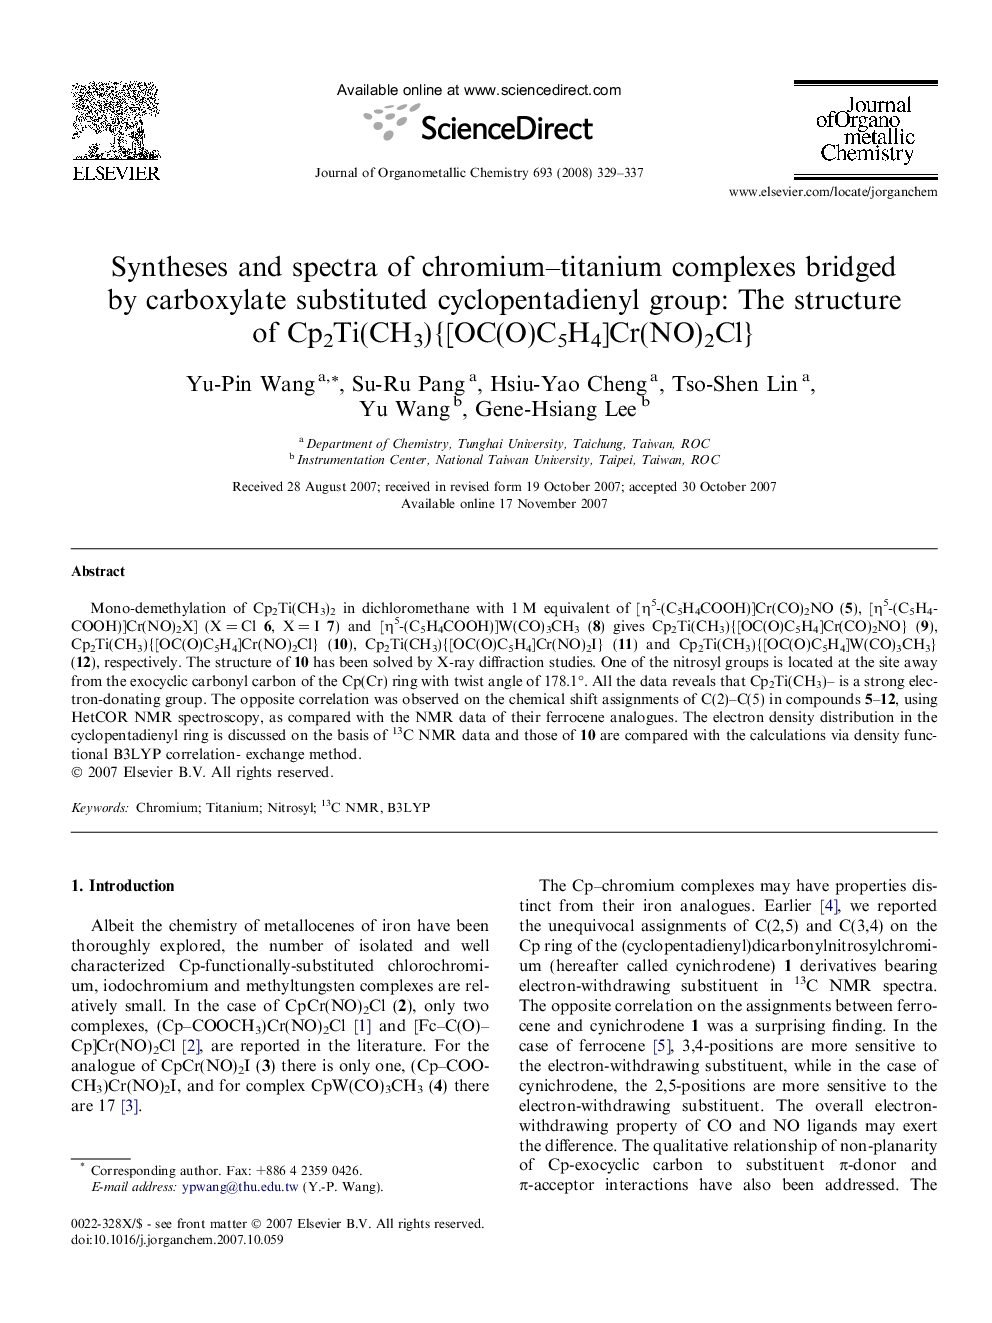 Syntheses and spectra of chromium-titanium complexes bridged by carboxylate substituted cyclopentadienyl group: The structure of Cp2Ti(CH3){[OC(O)C5H4]Cr(NO)2Cl}